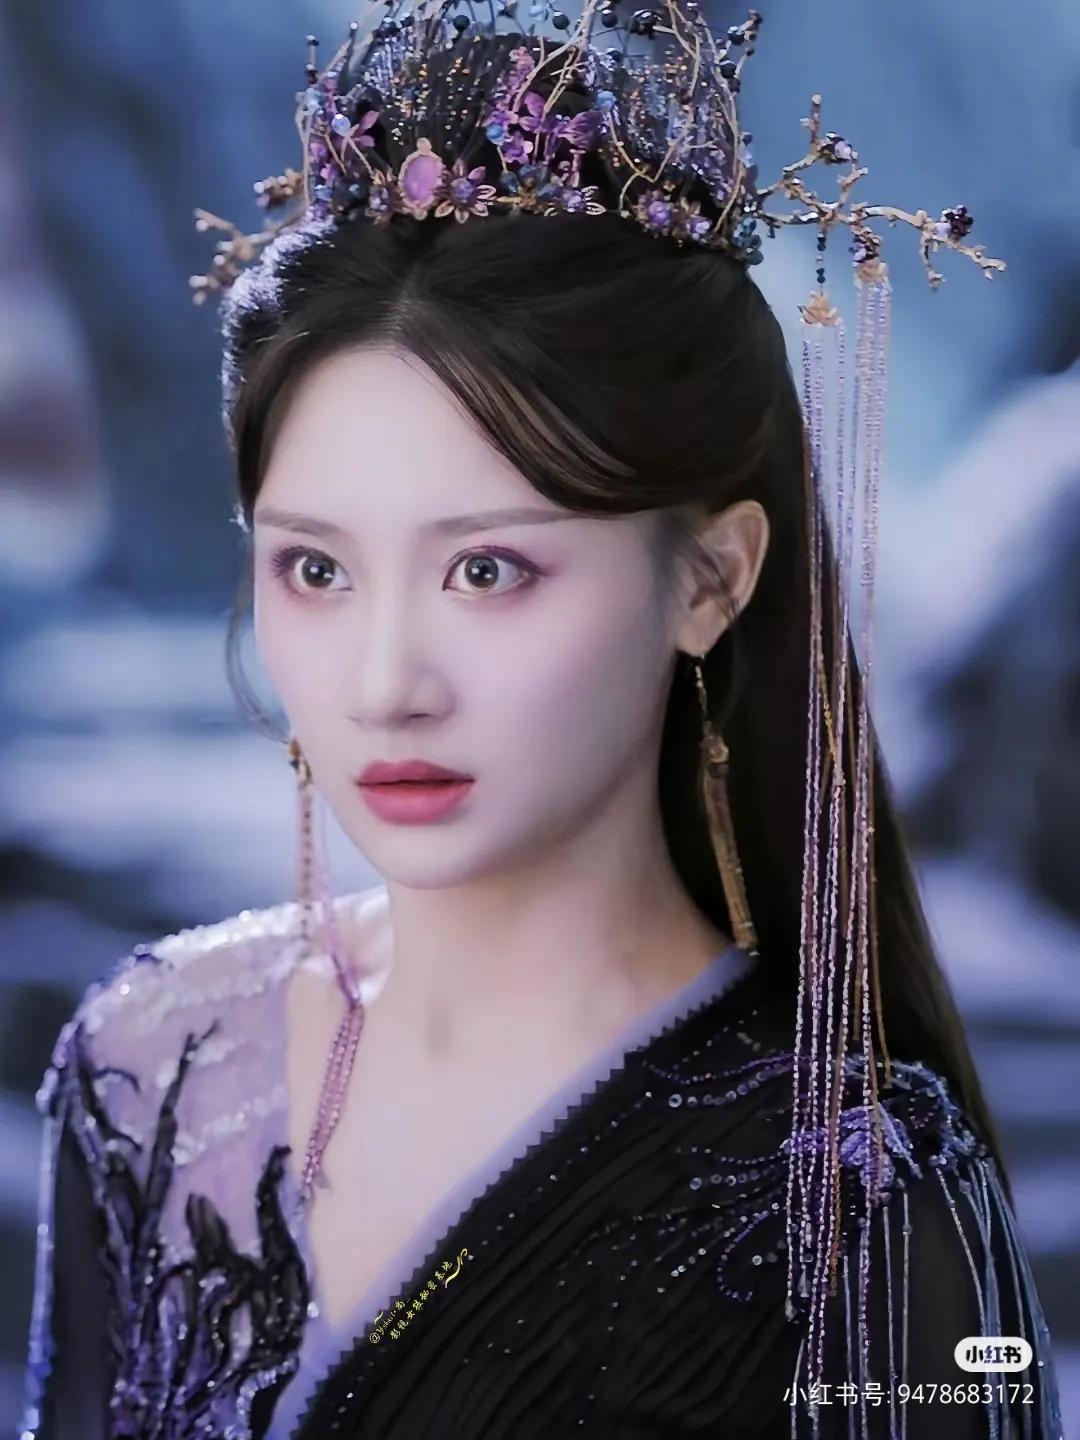 Qing Kui's appearance when she became Shen Yuan's concubine was really ...